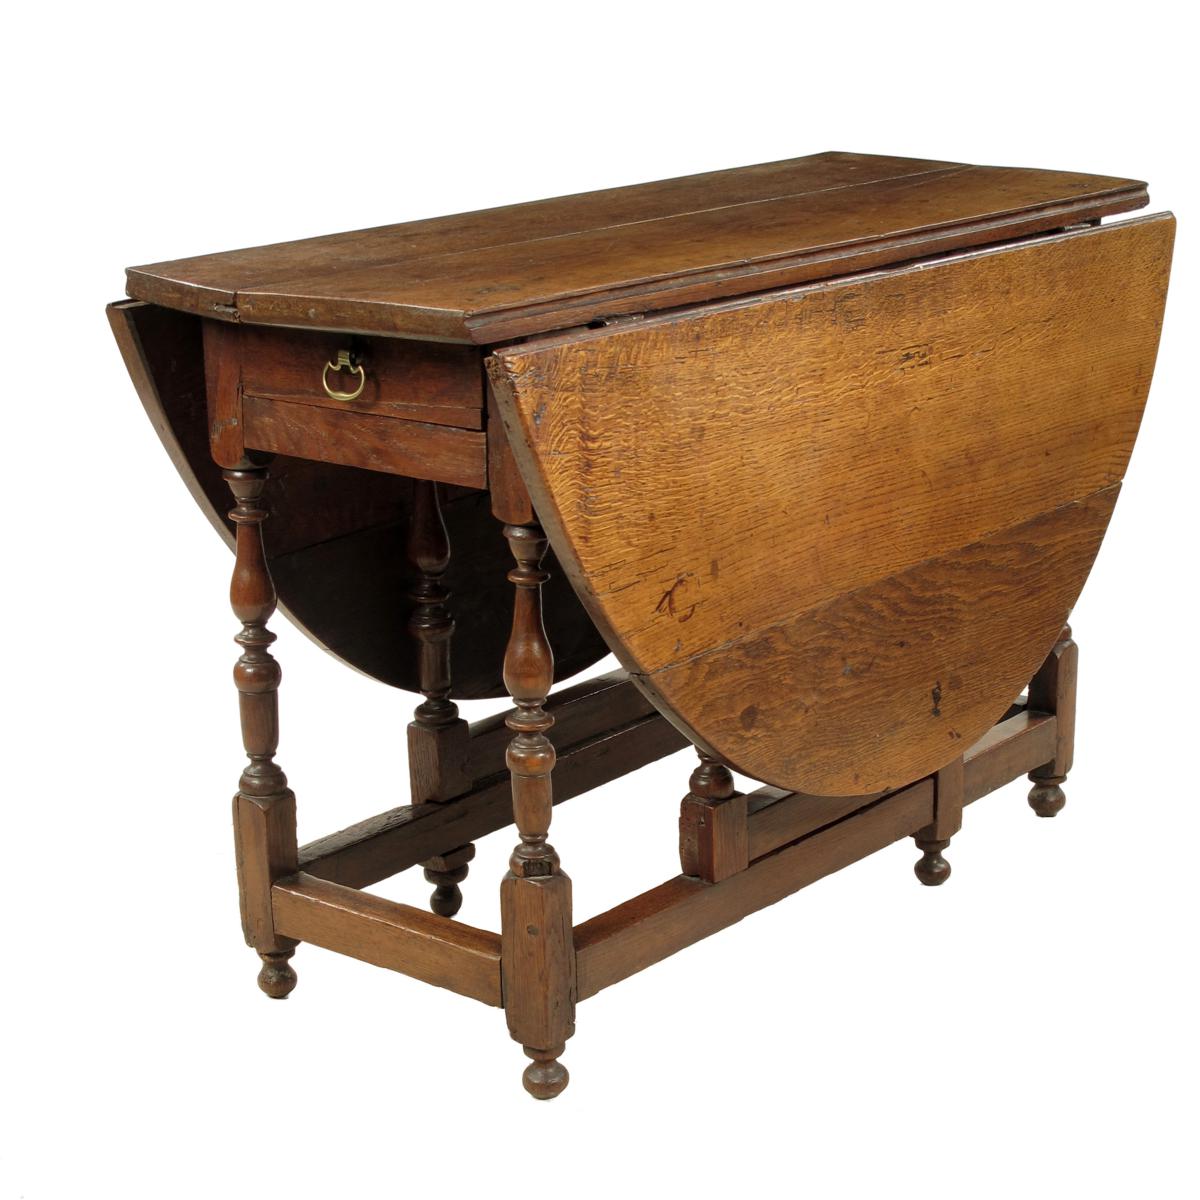 An oak gateleg table, with an oval top and an end frieze drawer, 18th century and later, 28?in (